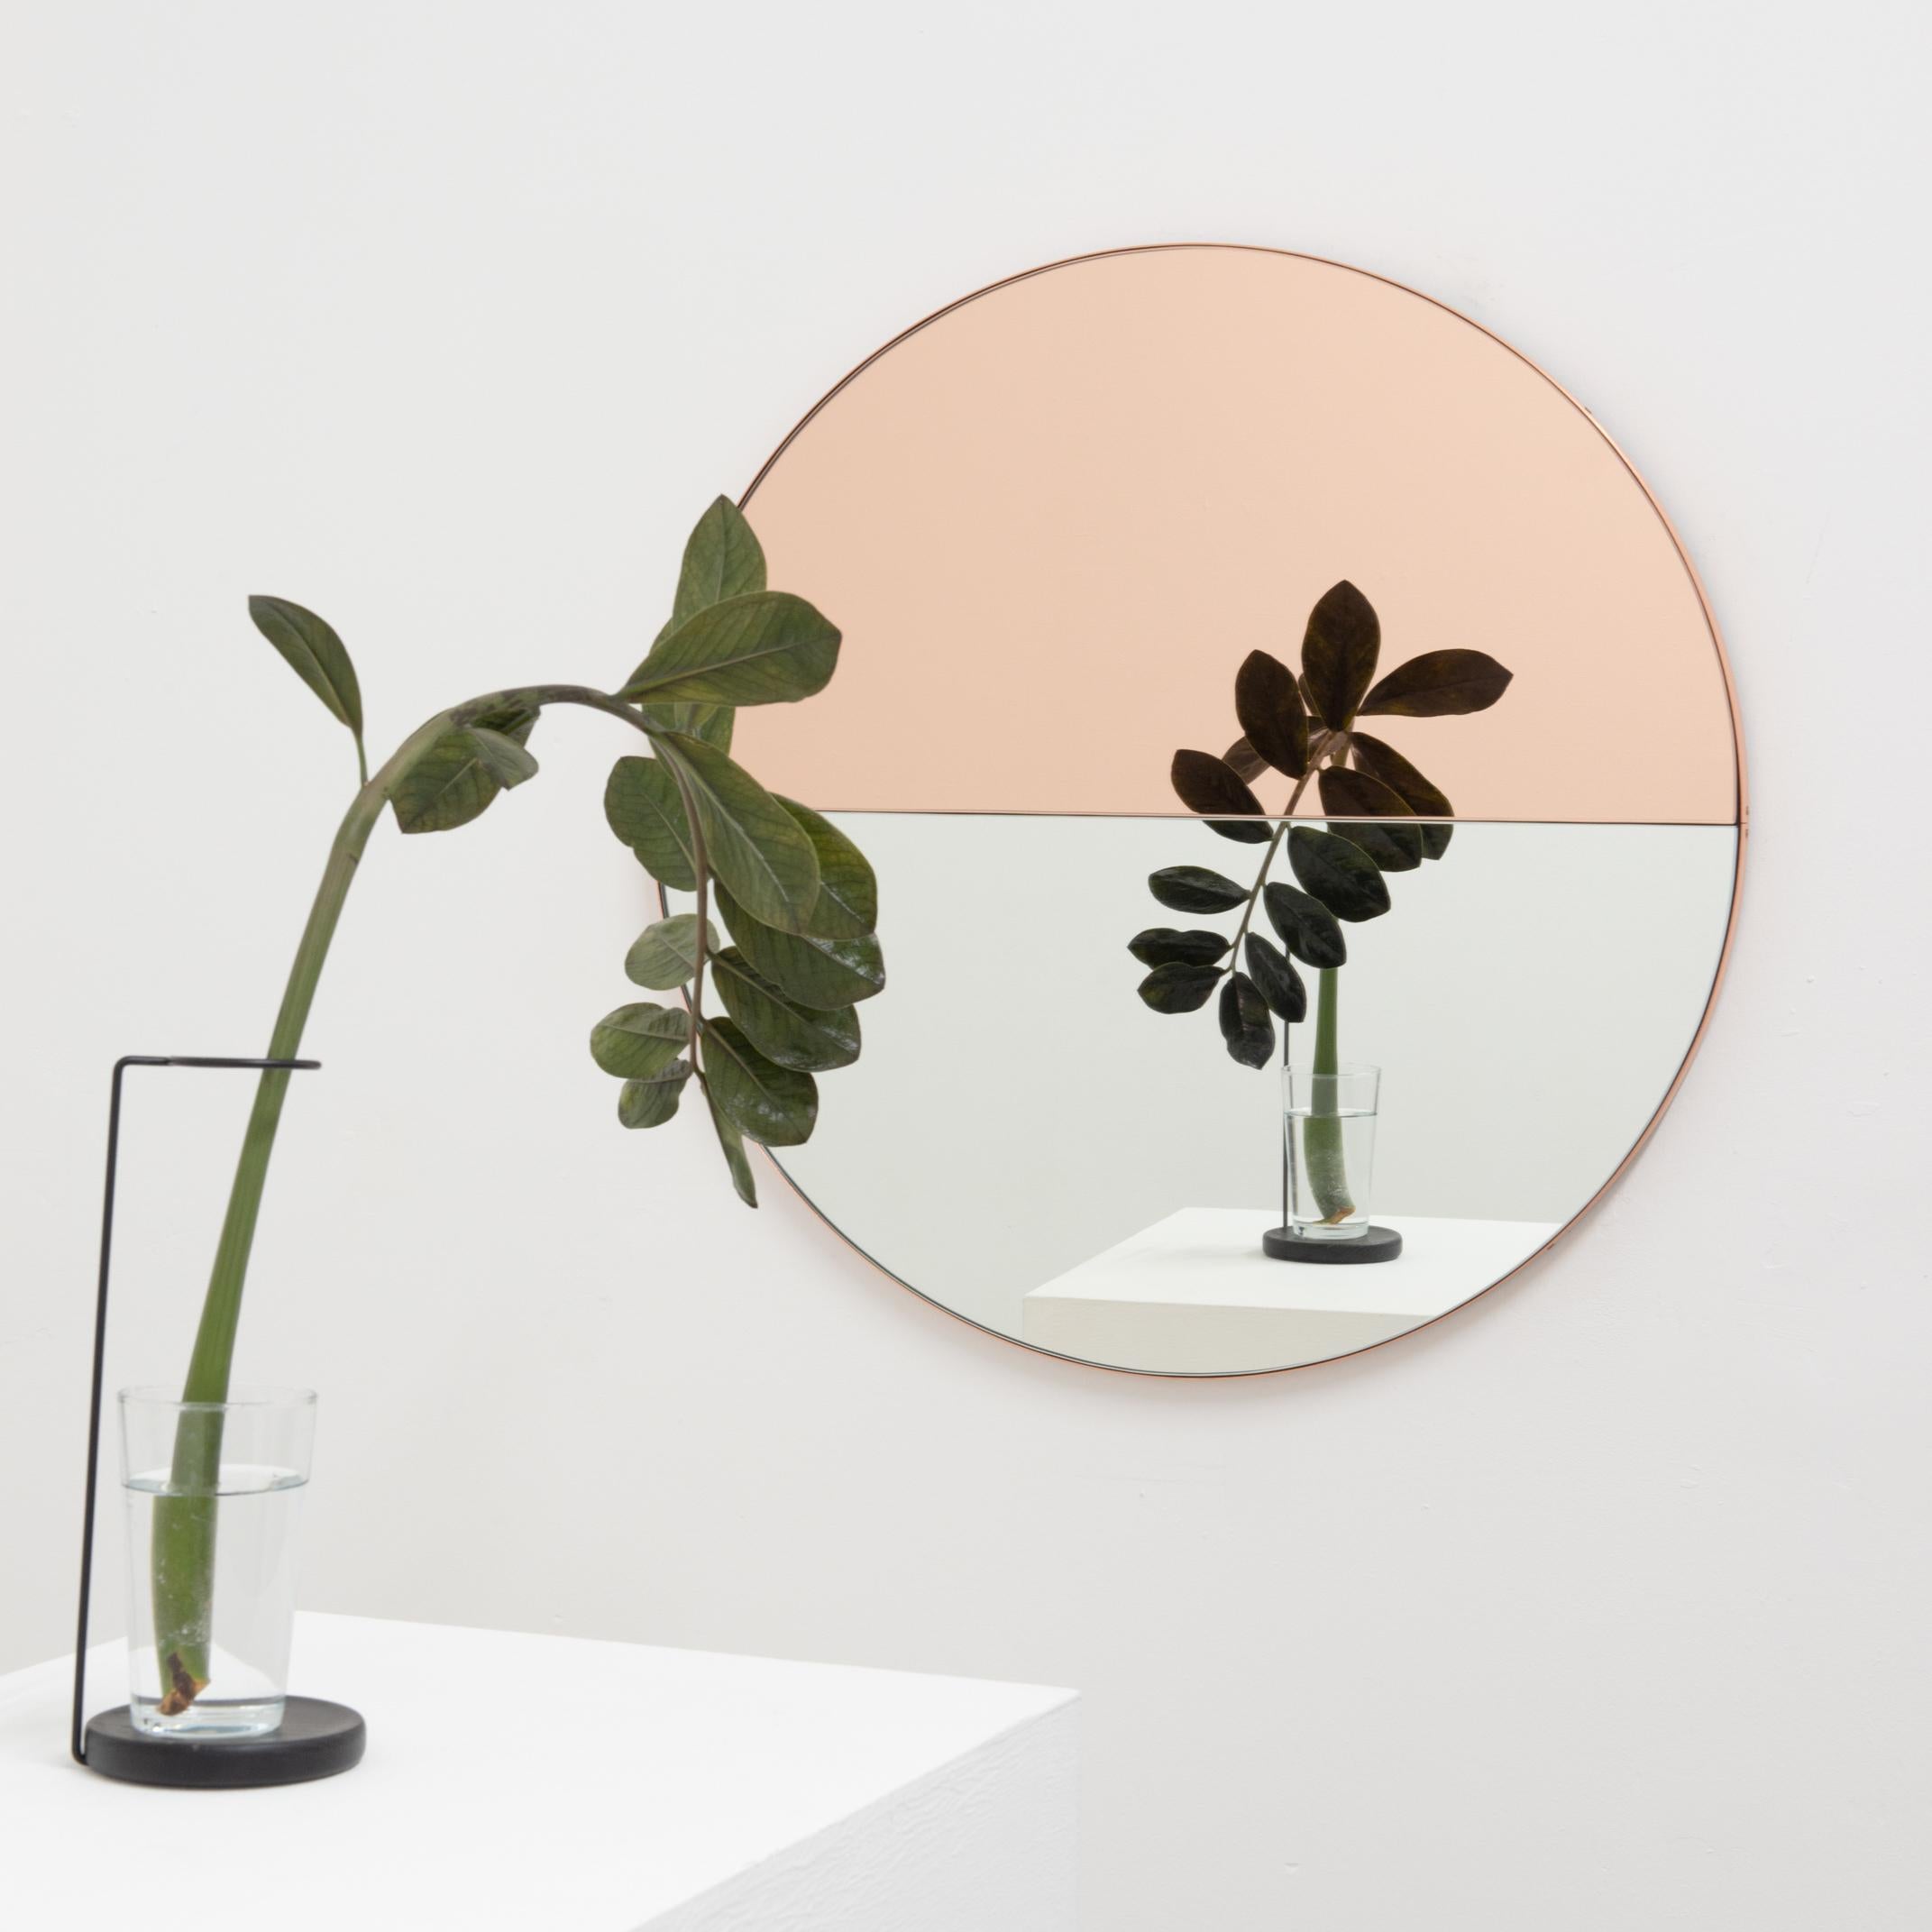 Orbis Dualis Mixed 'Rose Gold + Silver' Round Mirror with Copper Frame, Oversized 2